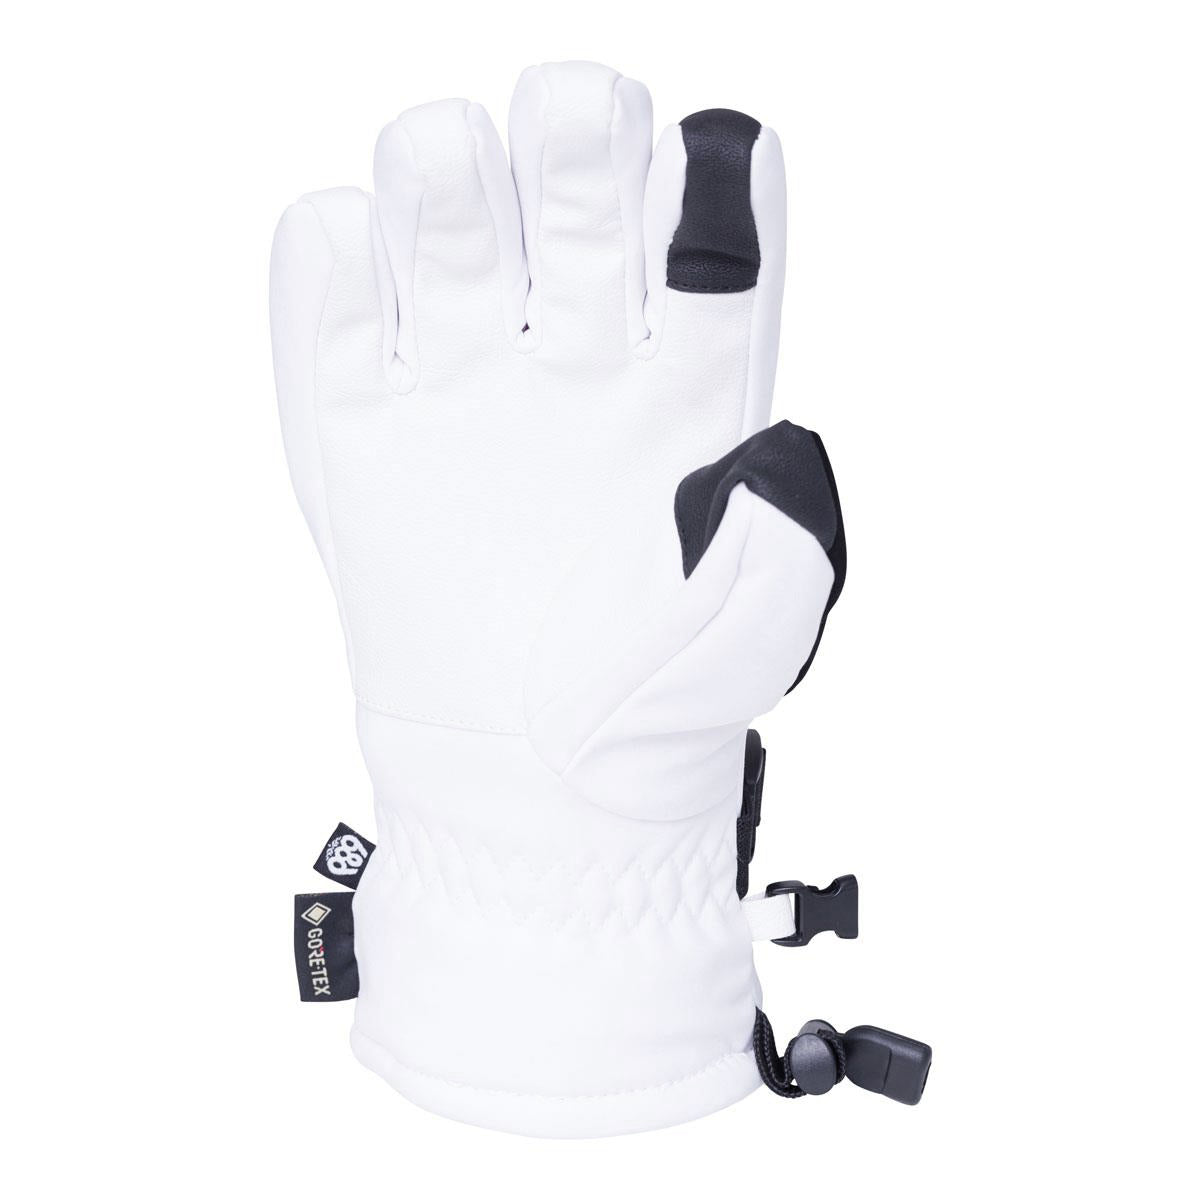 686 Womens Gore-Tex Linear Snowboard Gloves - White image 2